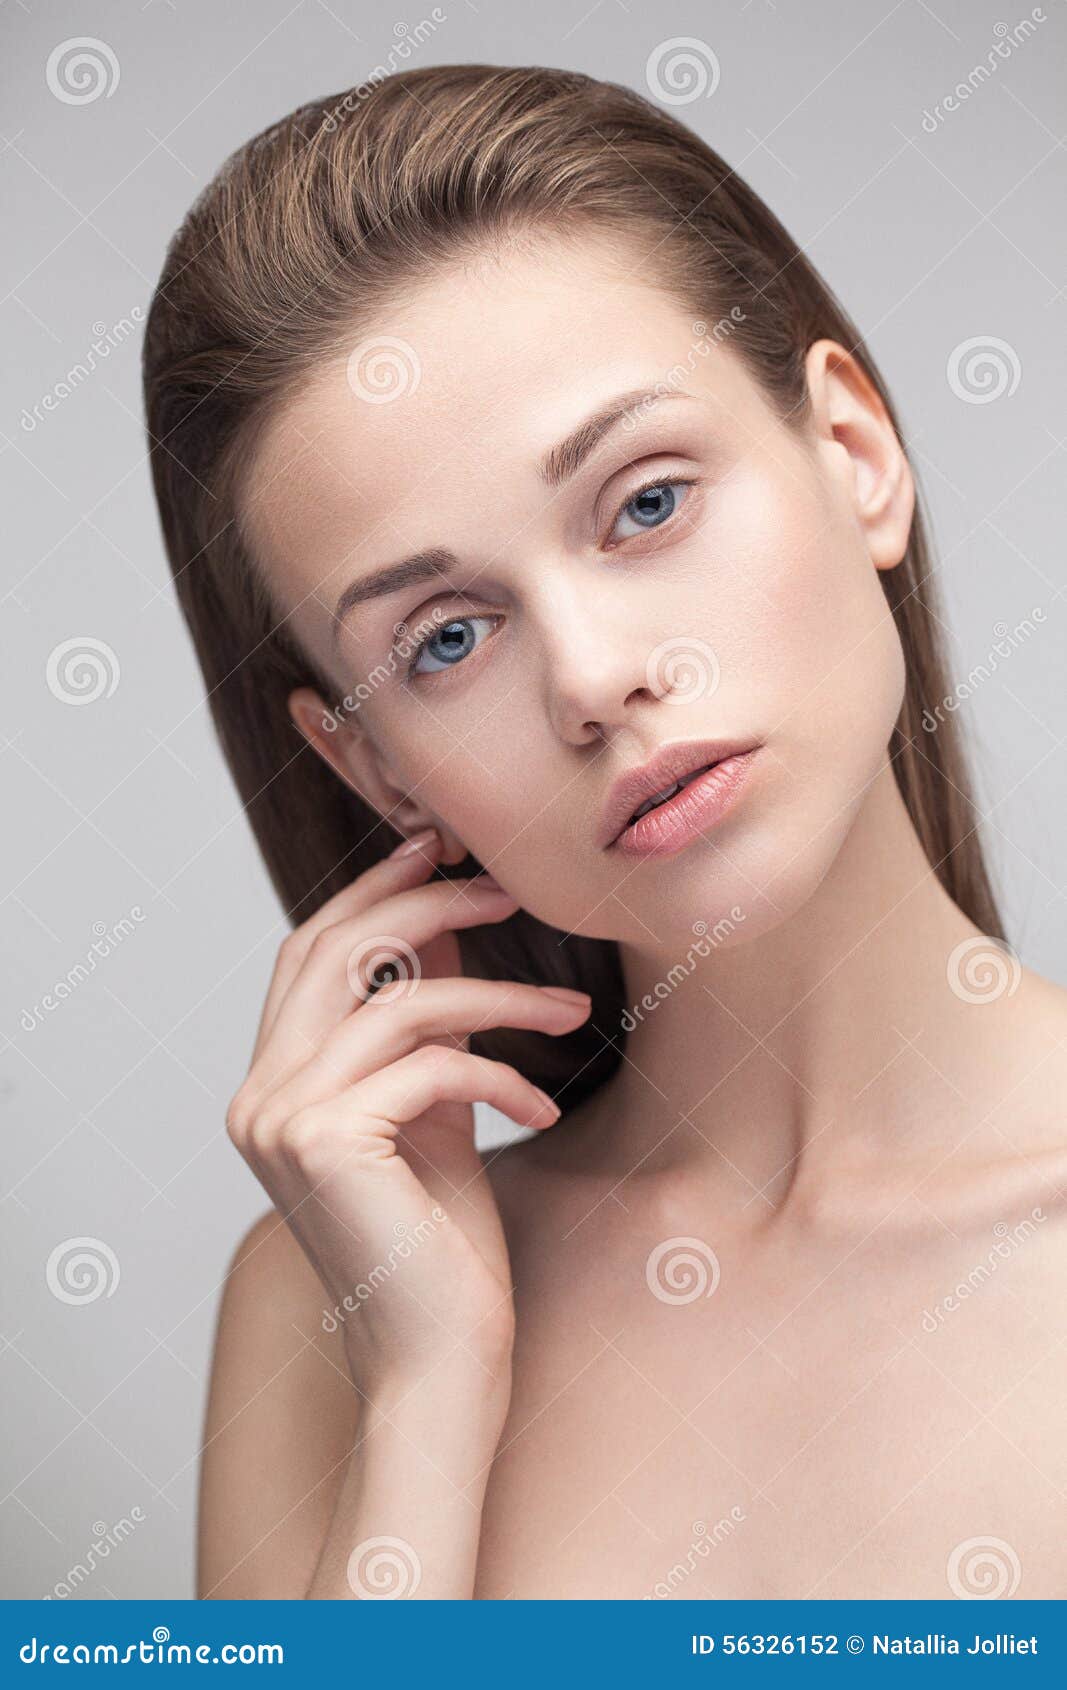 Young Pretty Woman Model Looking at Camera. Stock Photo - Image of ...